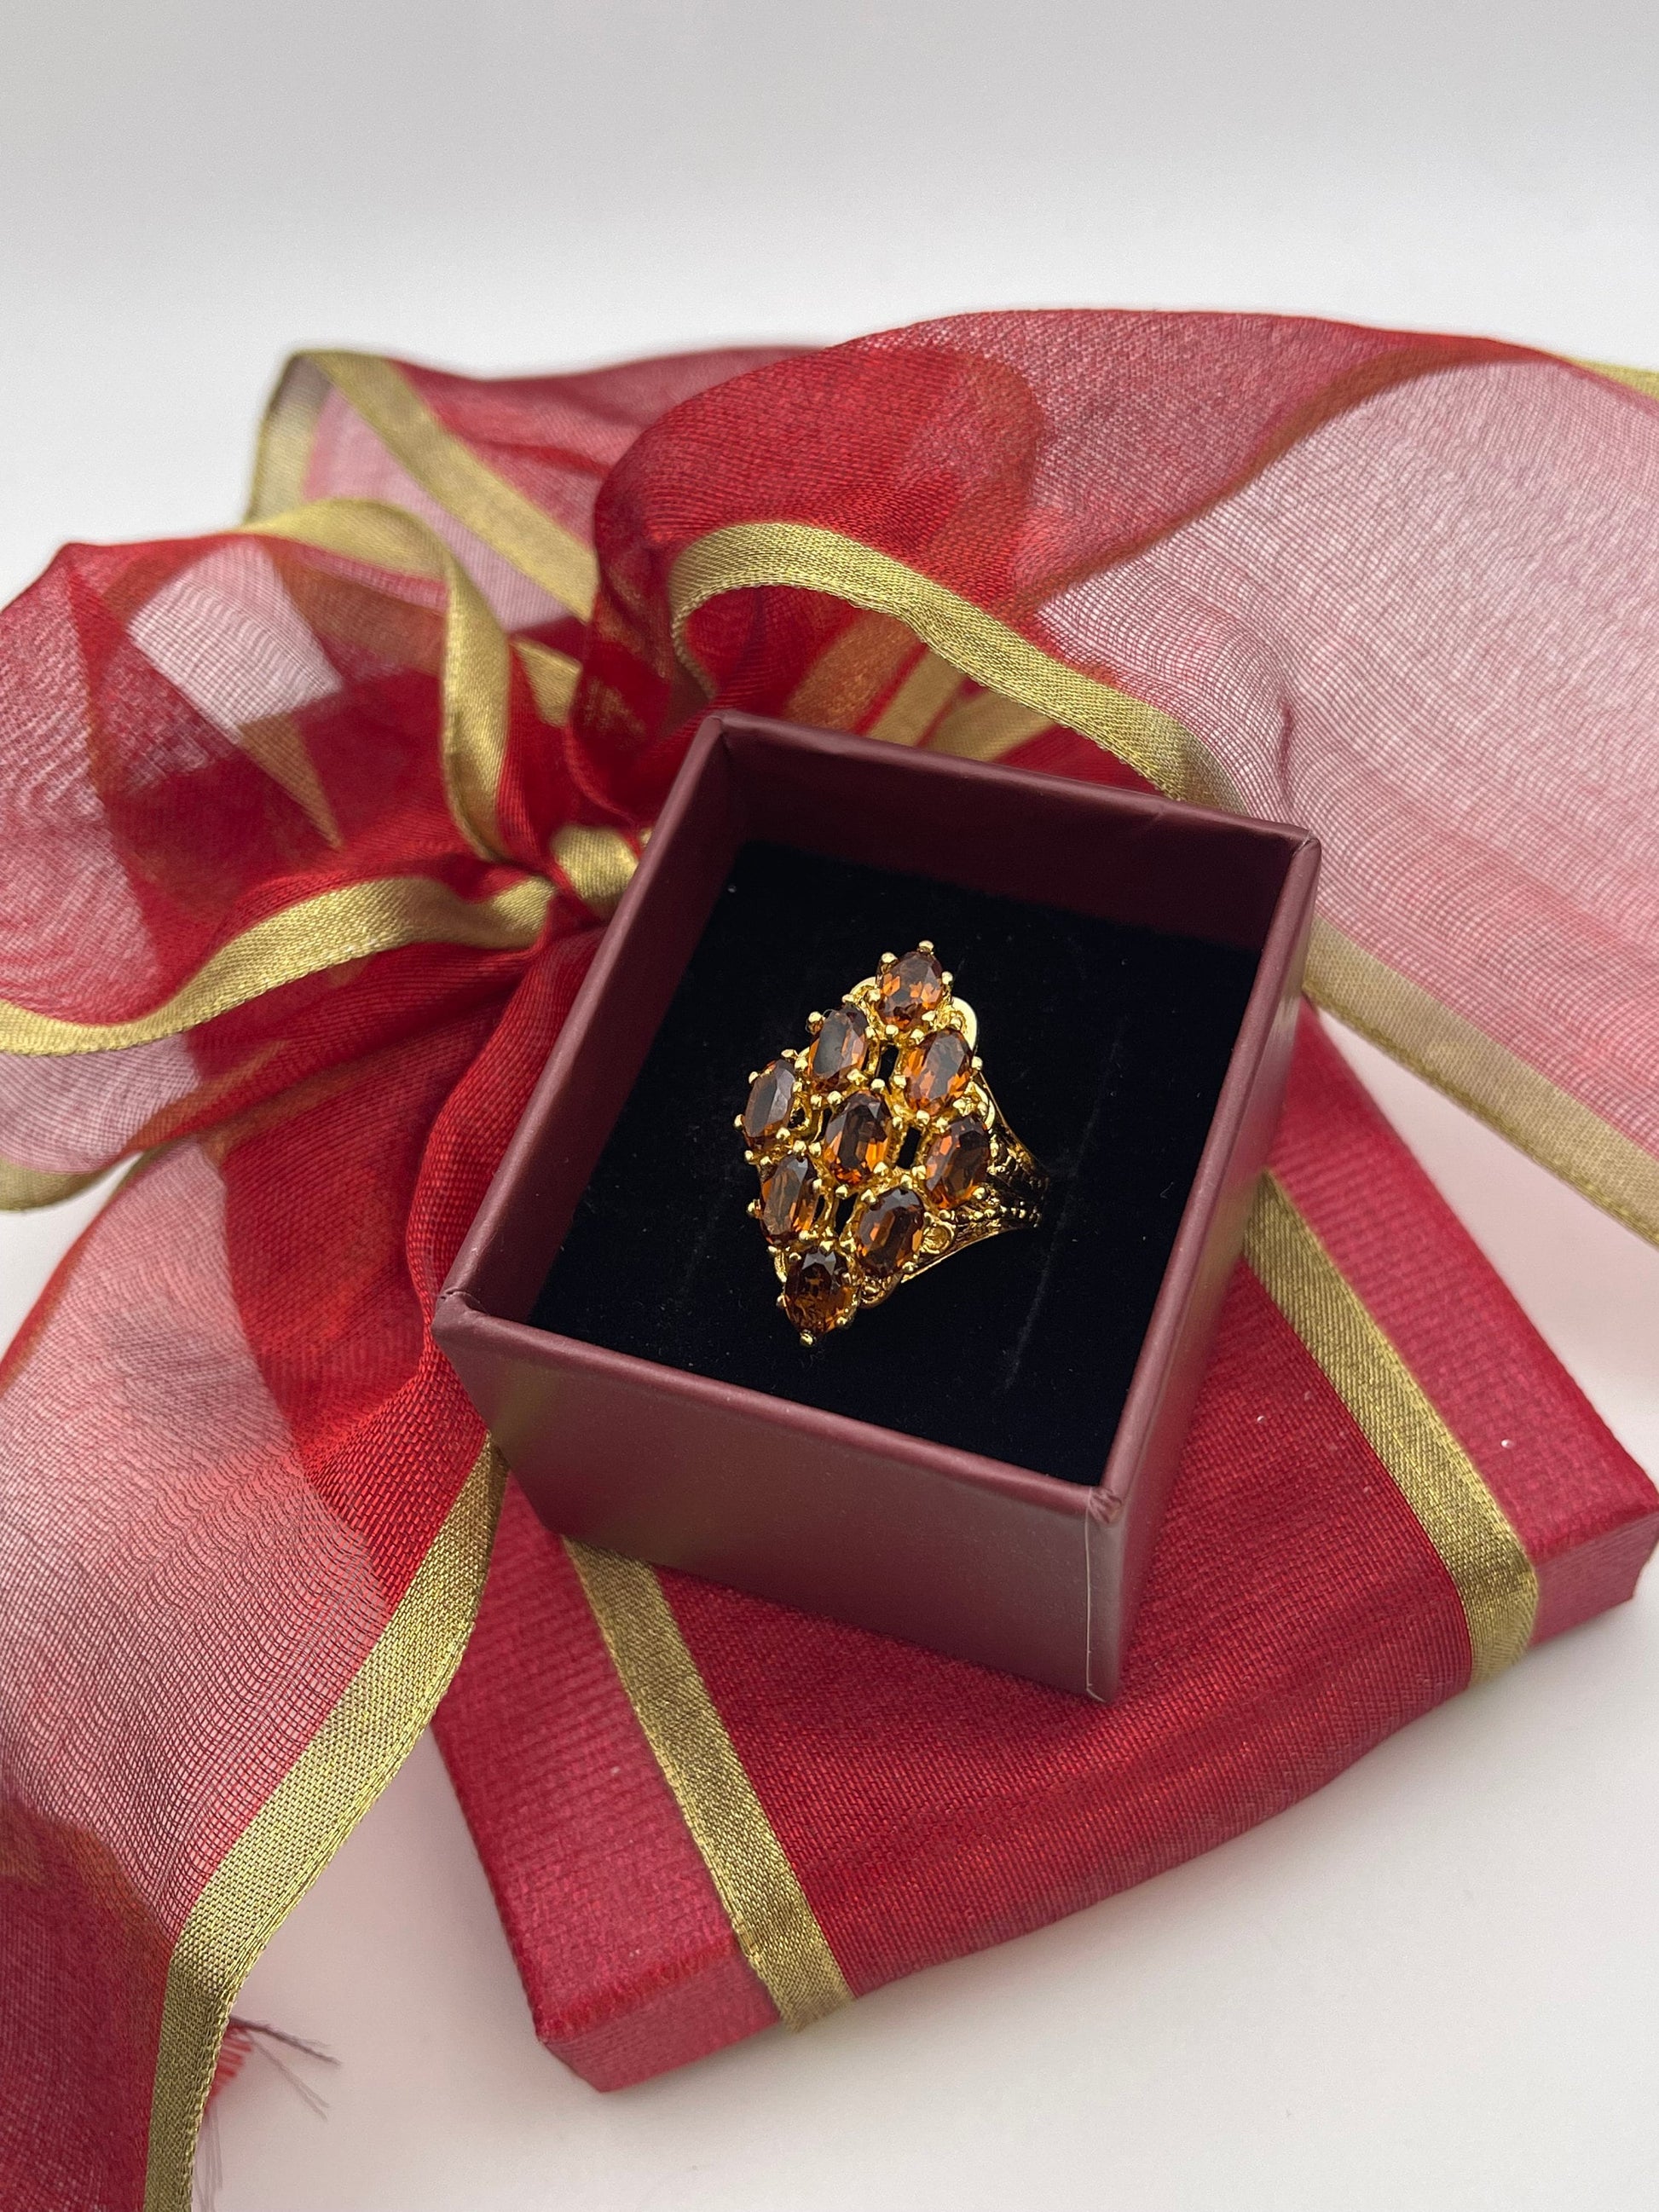 Vintage Ring Smoky Topaz Austrian Crystal Cocktail Ring 18k Antique Gold for Women R284 - Limited Stock - Never Worn